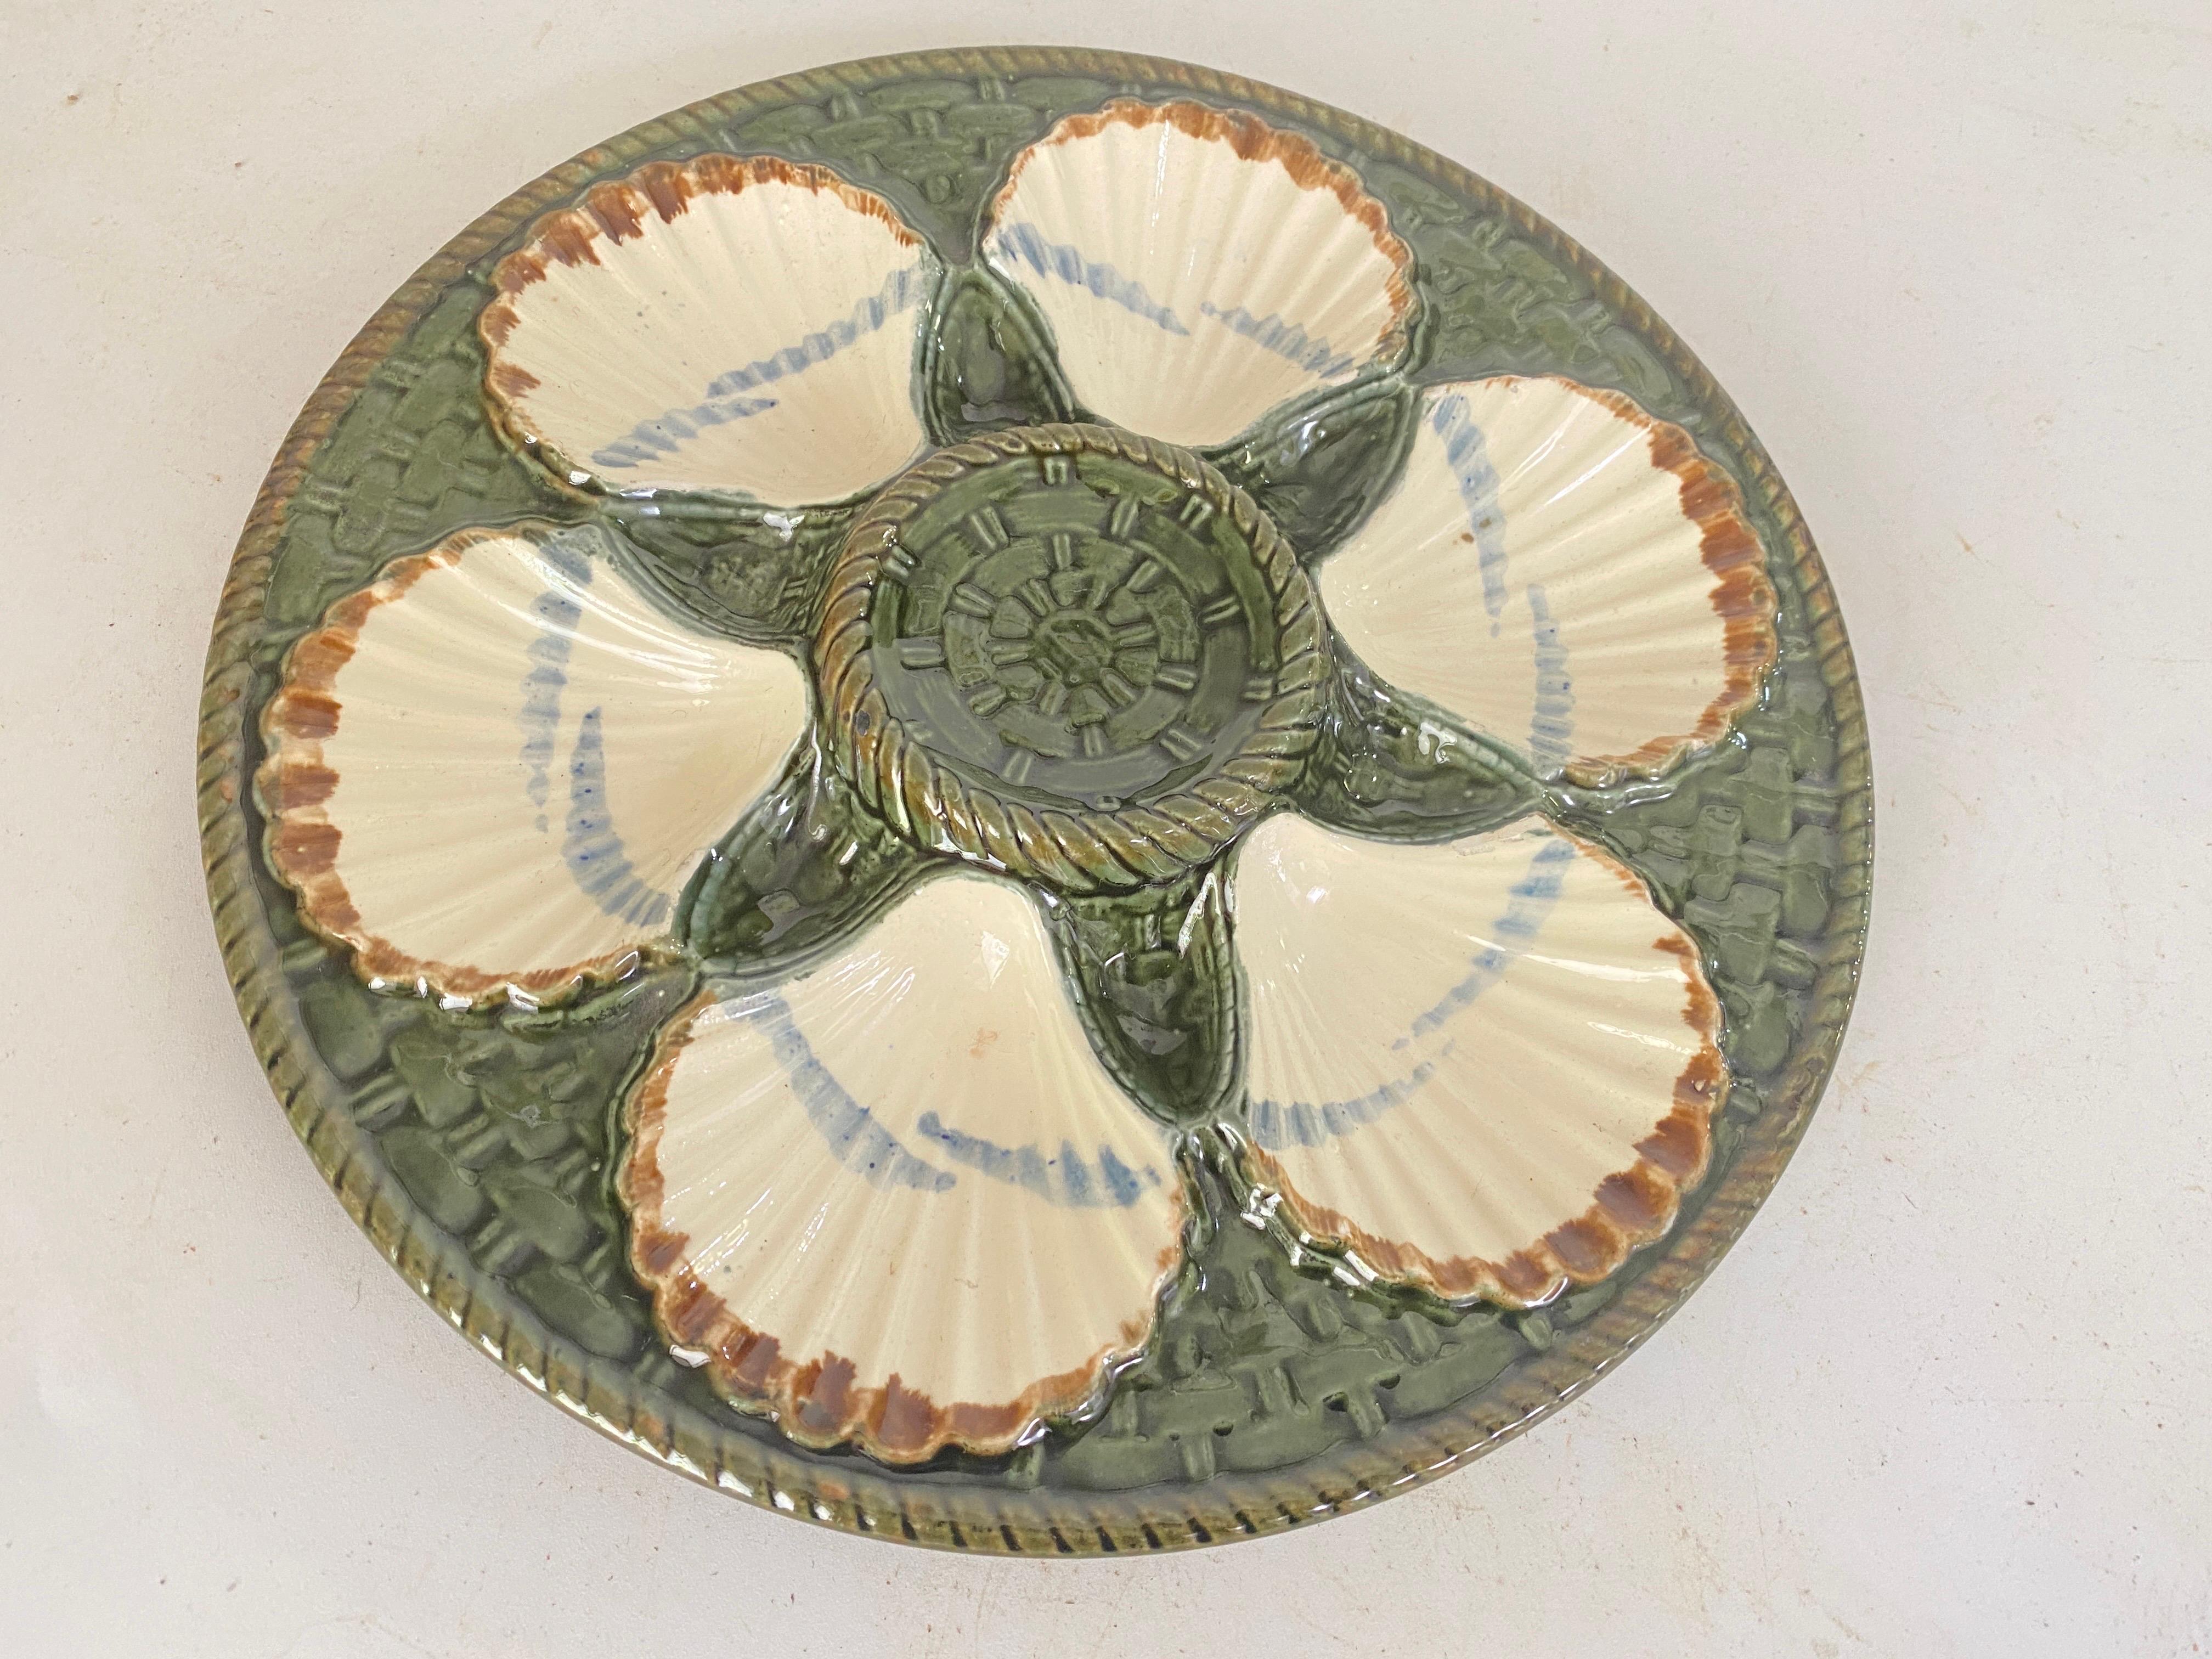 Oyster Plate in Majolica Green and White Color 19th Century Longchamp France 3